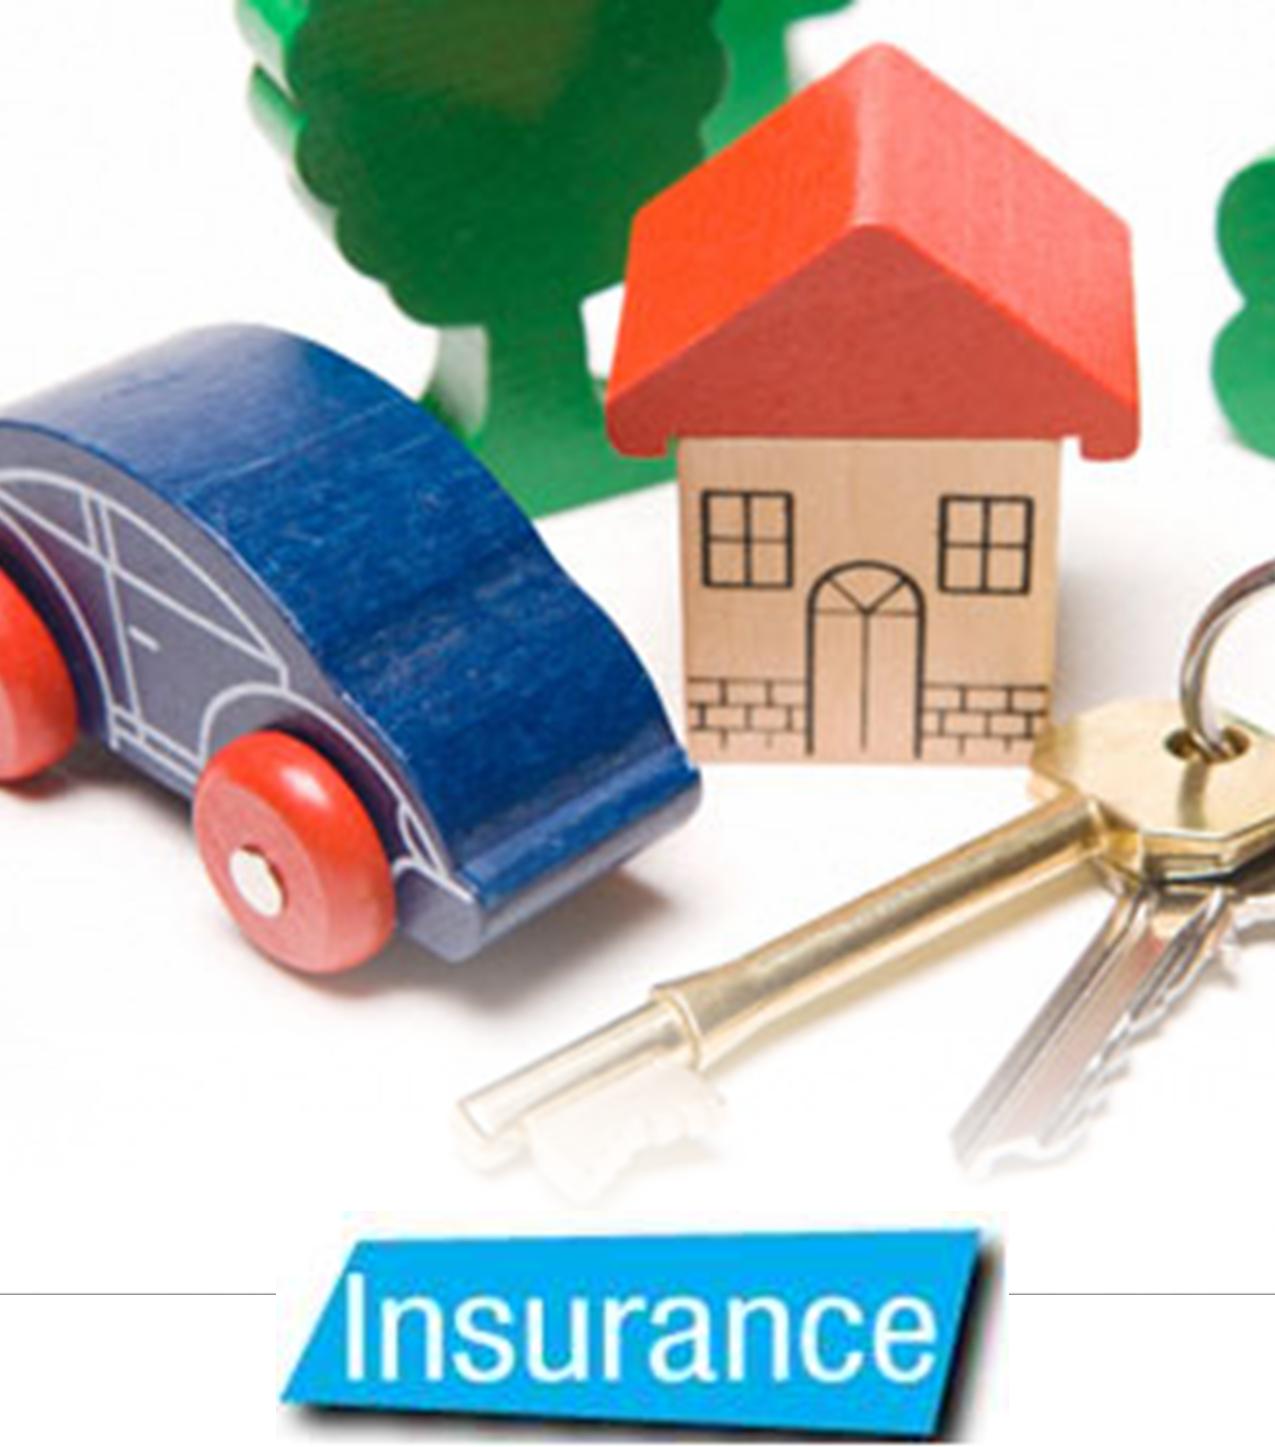 Homeowners insurance in 2013 | Reference Professional Guidance